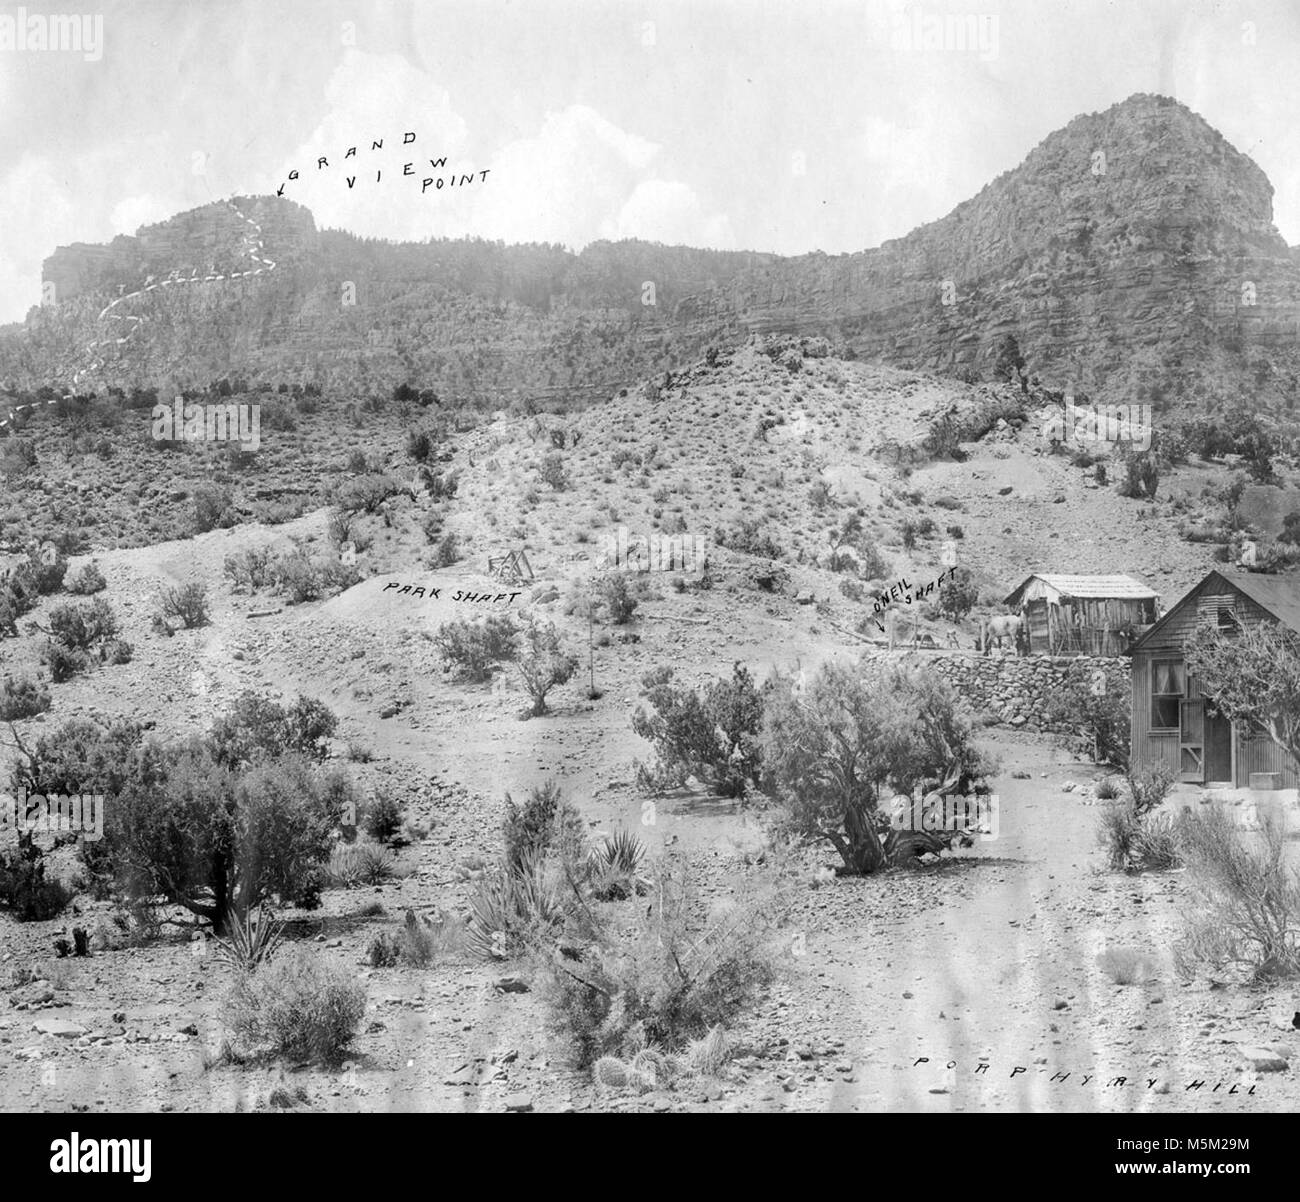 Grand Canyon Historic Grandview Trail . Looking up at grandview point from horseshoe mesa, canyon copper co. Mine property. Circa 1907. Impressions of the dazzling topography of Grand Canyon have changed and shifted since that day in the summer of 1540 when Garcia Lopez de Cardenas gazed out from the South Rim. The conquistador saw a worthless desert wasteland, nothing more than a barrier to political expansion. At the opposite extreme Stock Photo